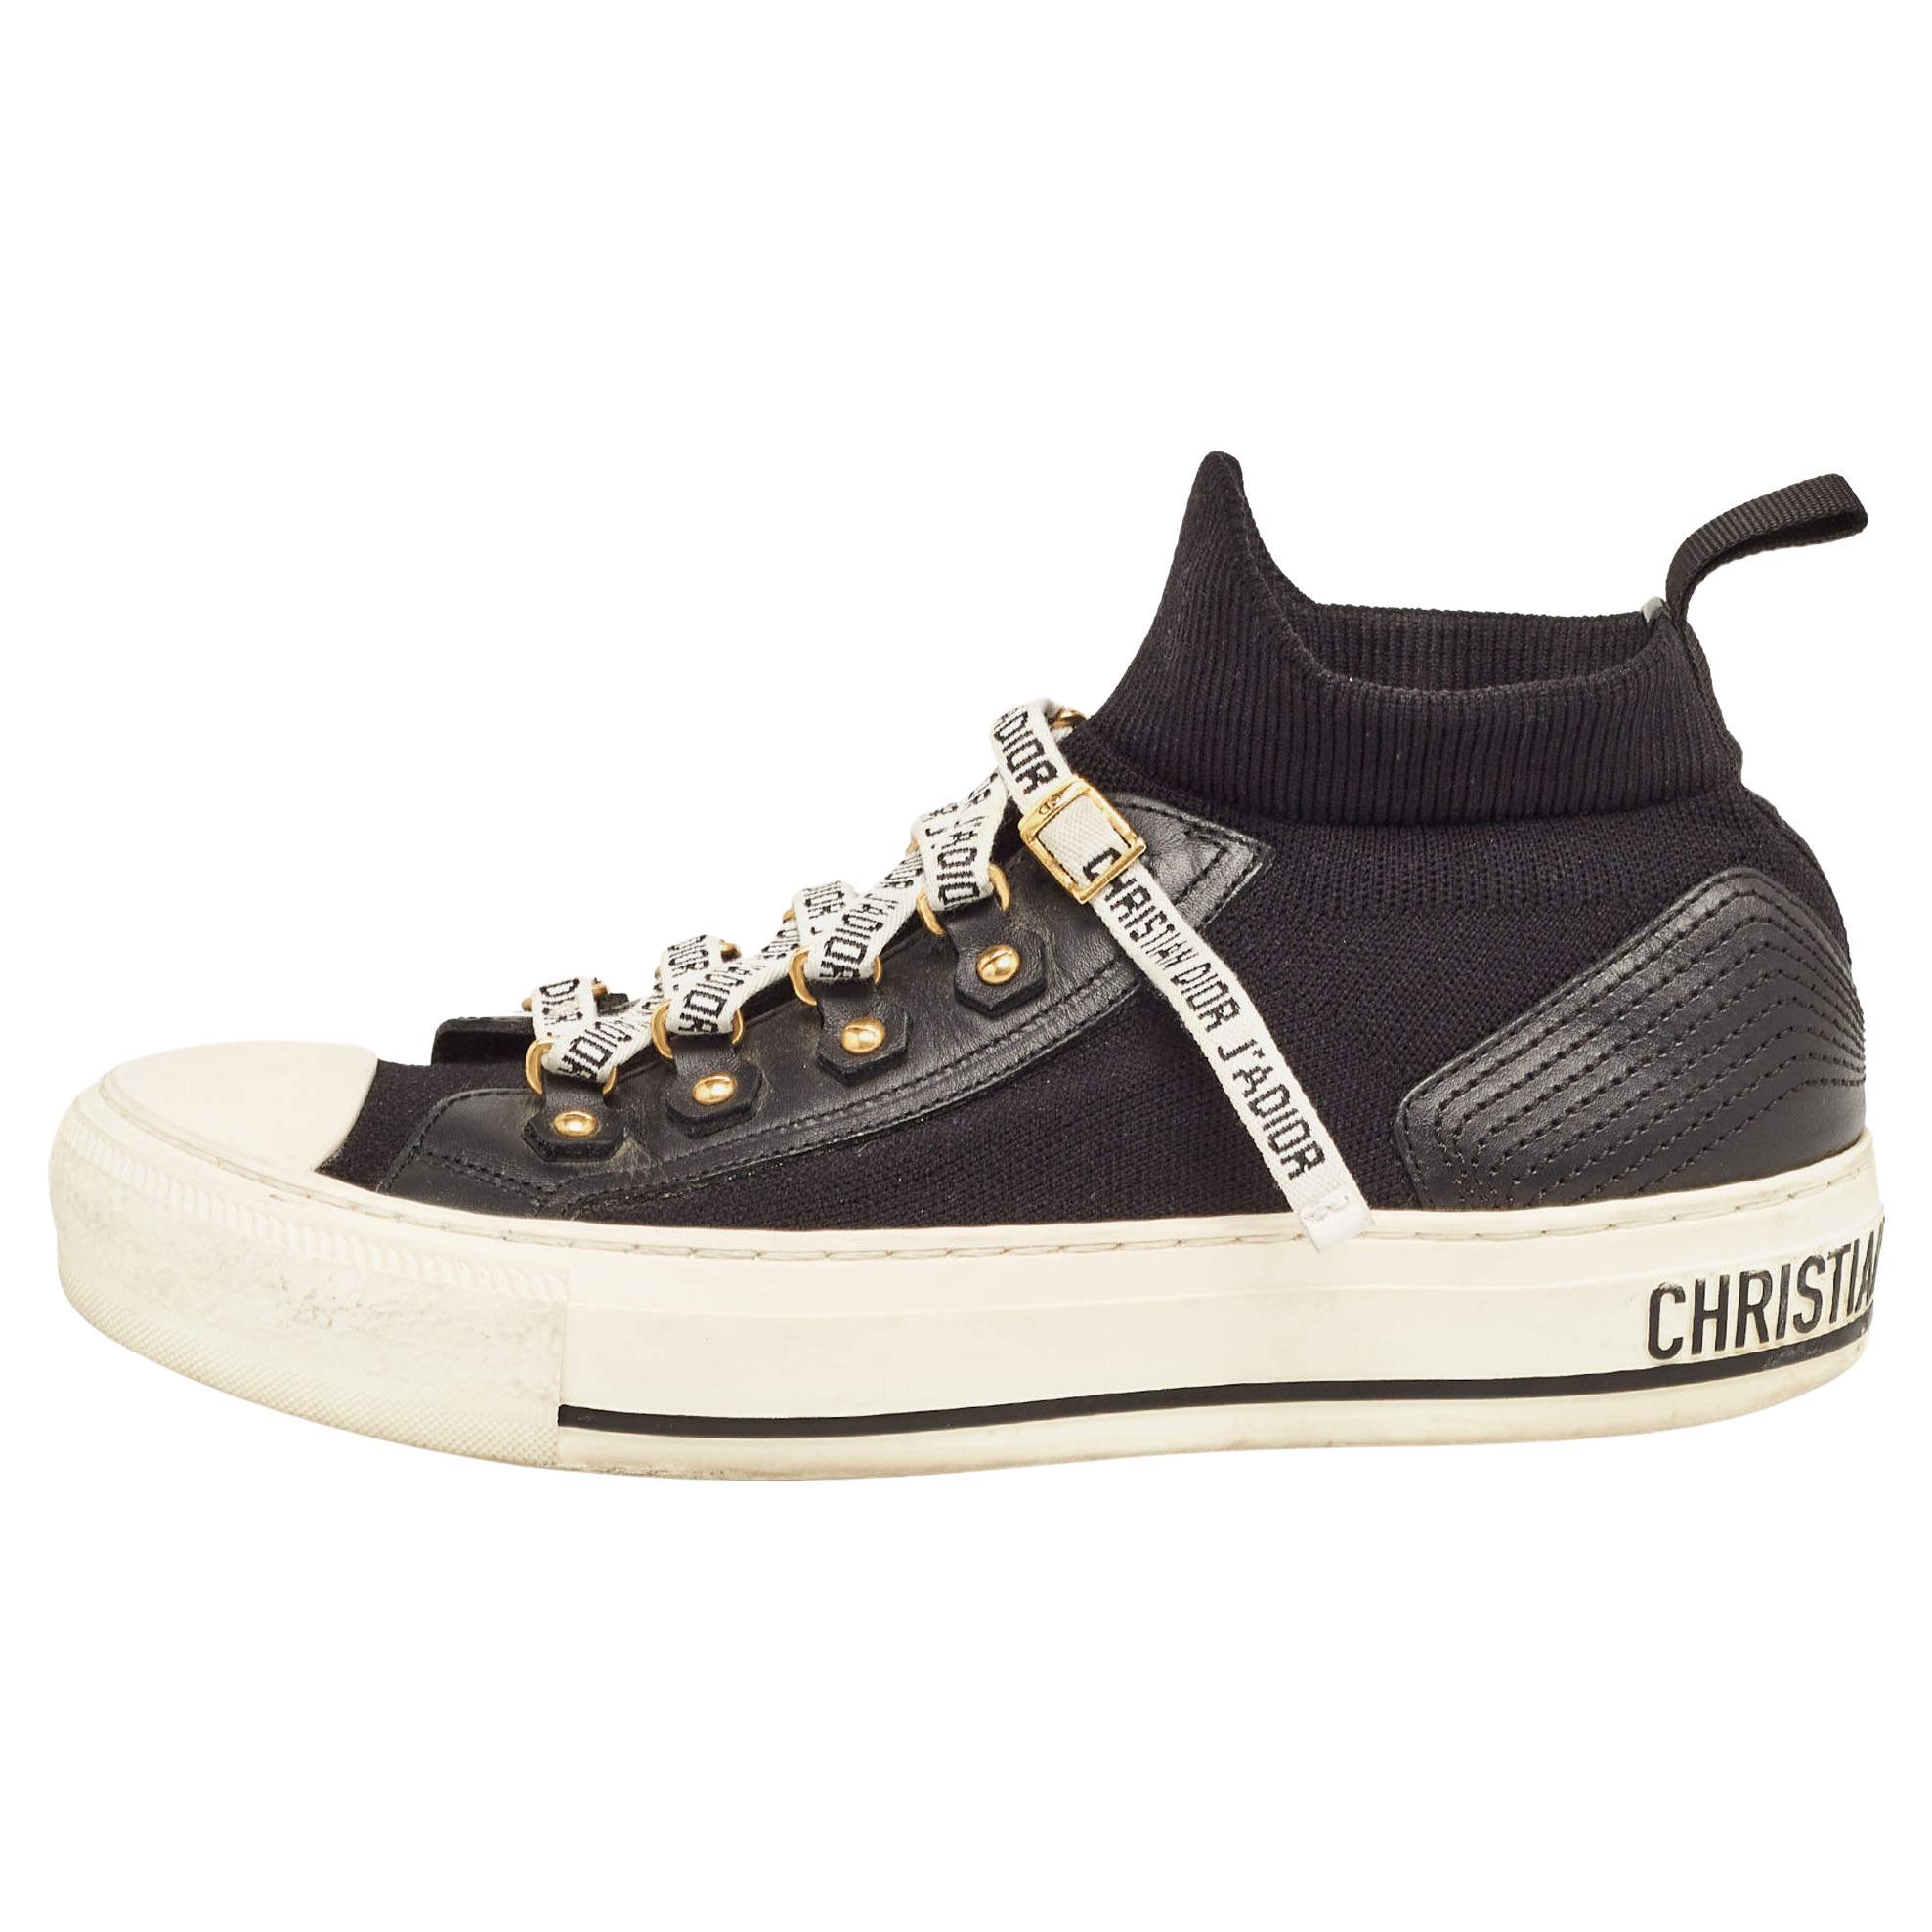 How can I style Dior B23 sneakers?